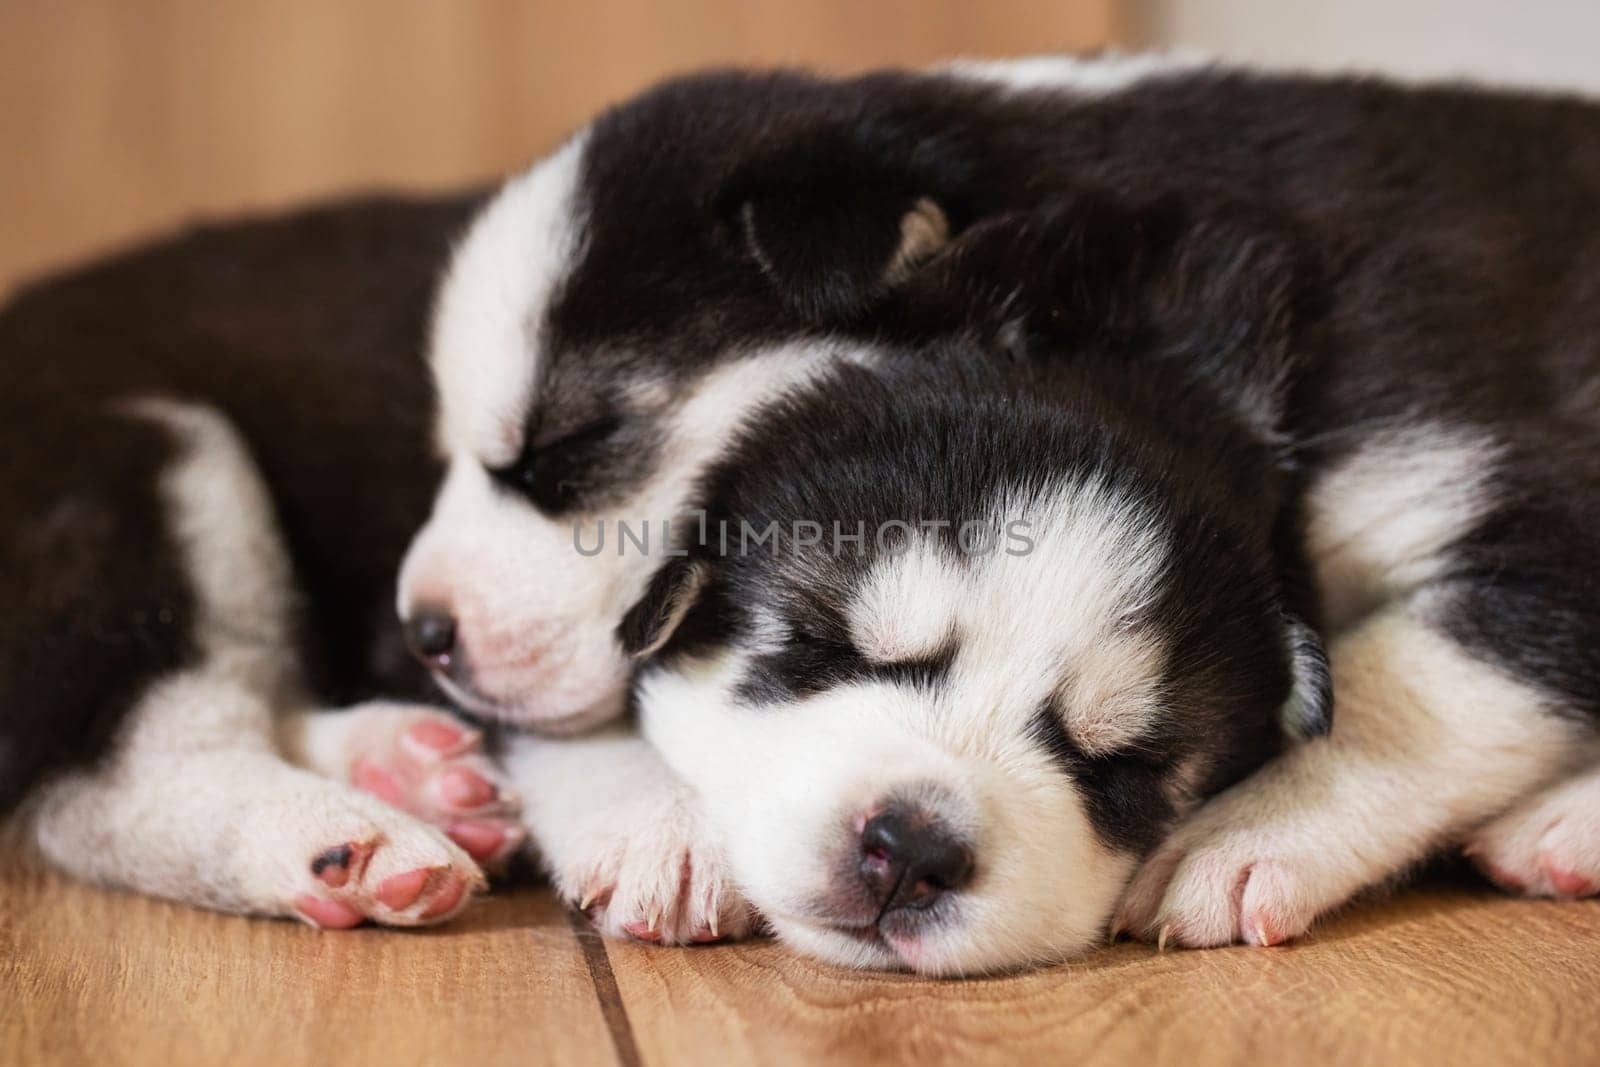 Black and white husky puppies resting on the floor in a house or apartment by andreyz